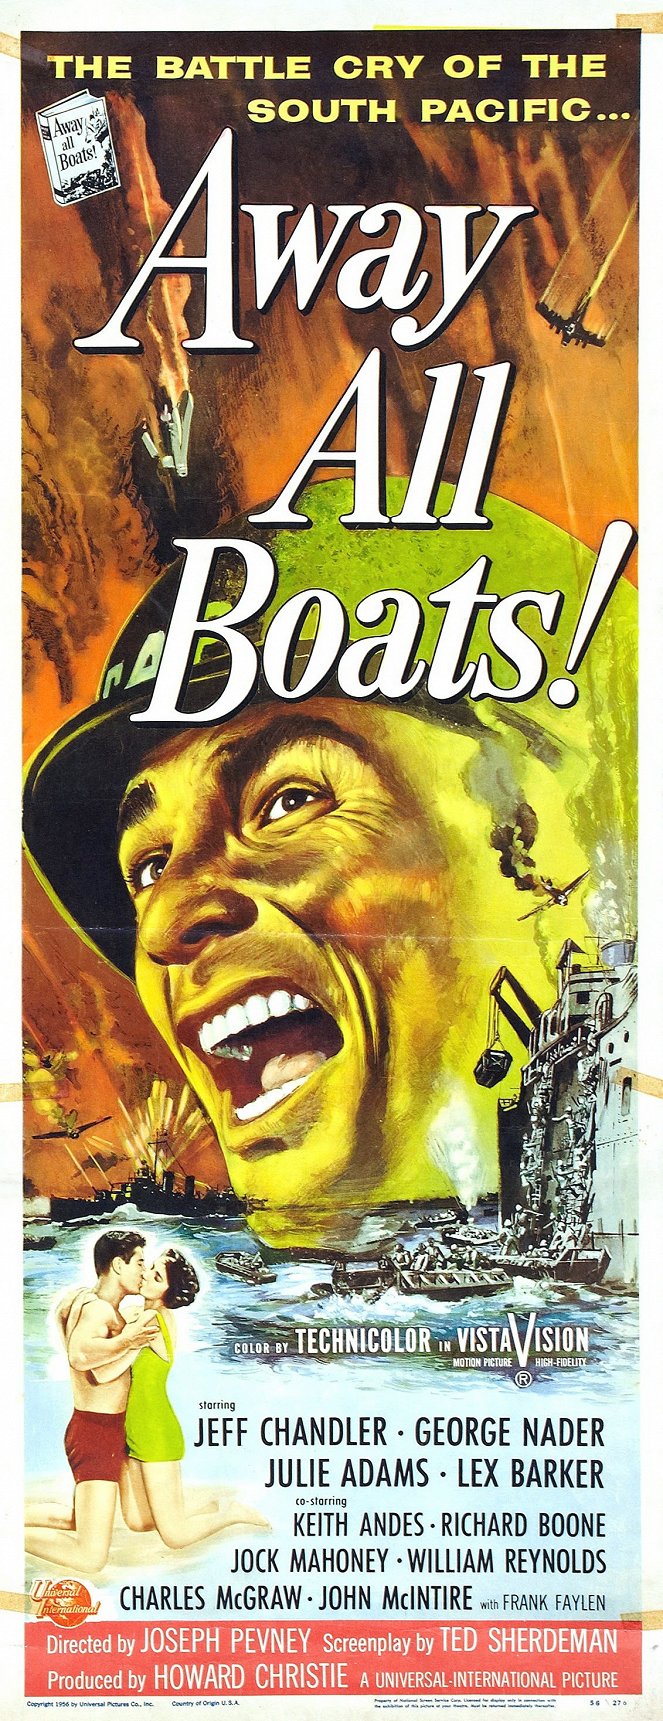 Away All Boats - Posters